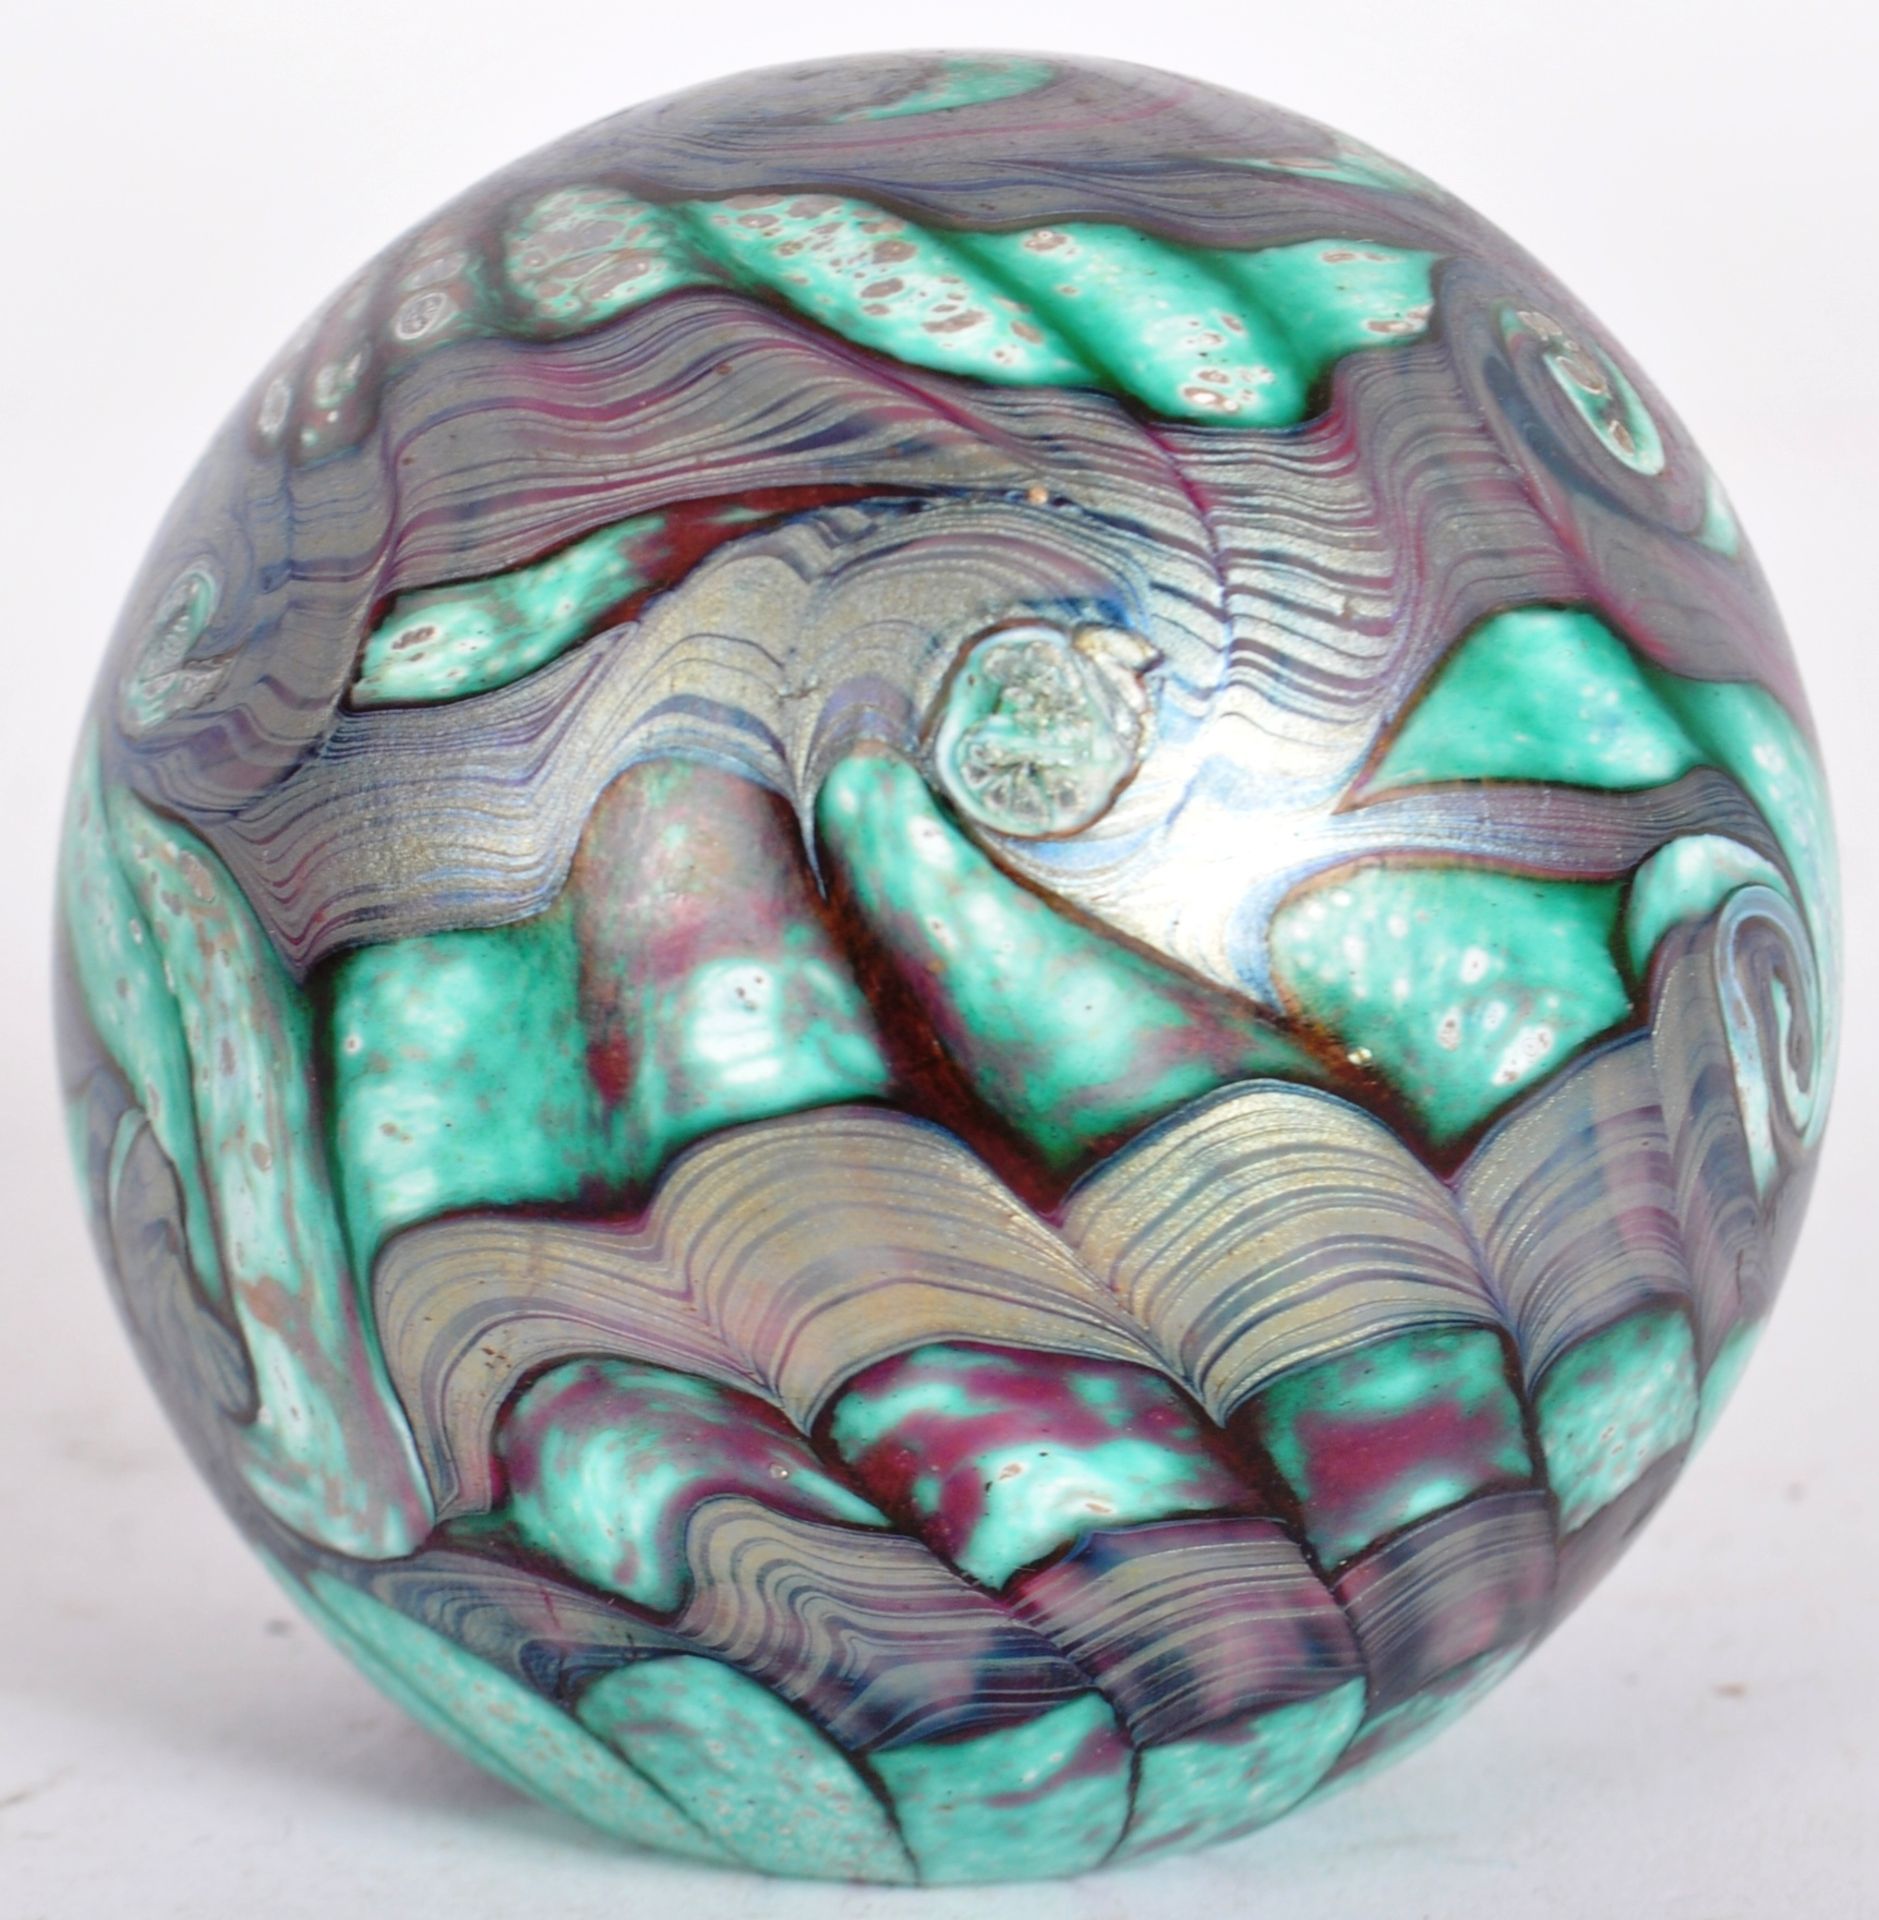 MICHAEL HARRIS FOR ISLE OF WIGHT - GLASS PAPERWEIGHT - Image 3 of 9